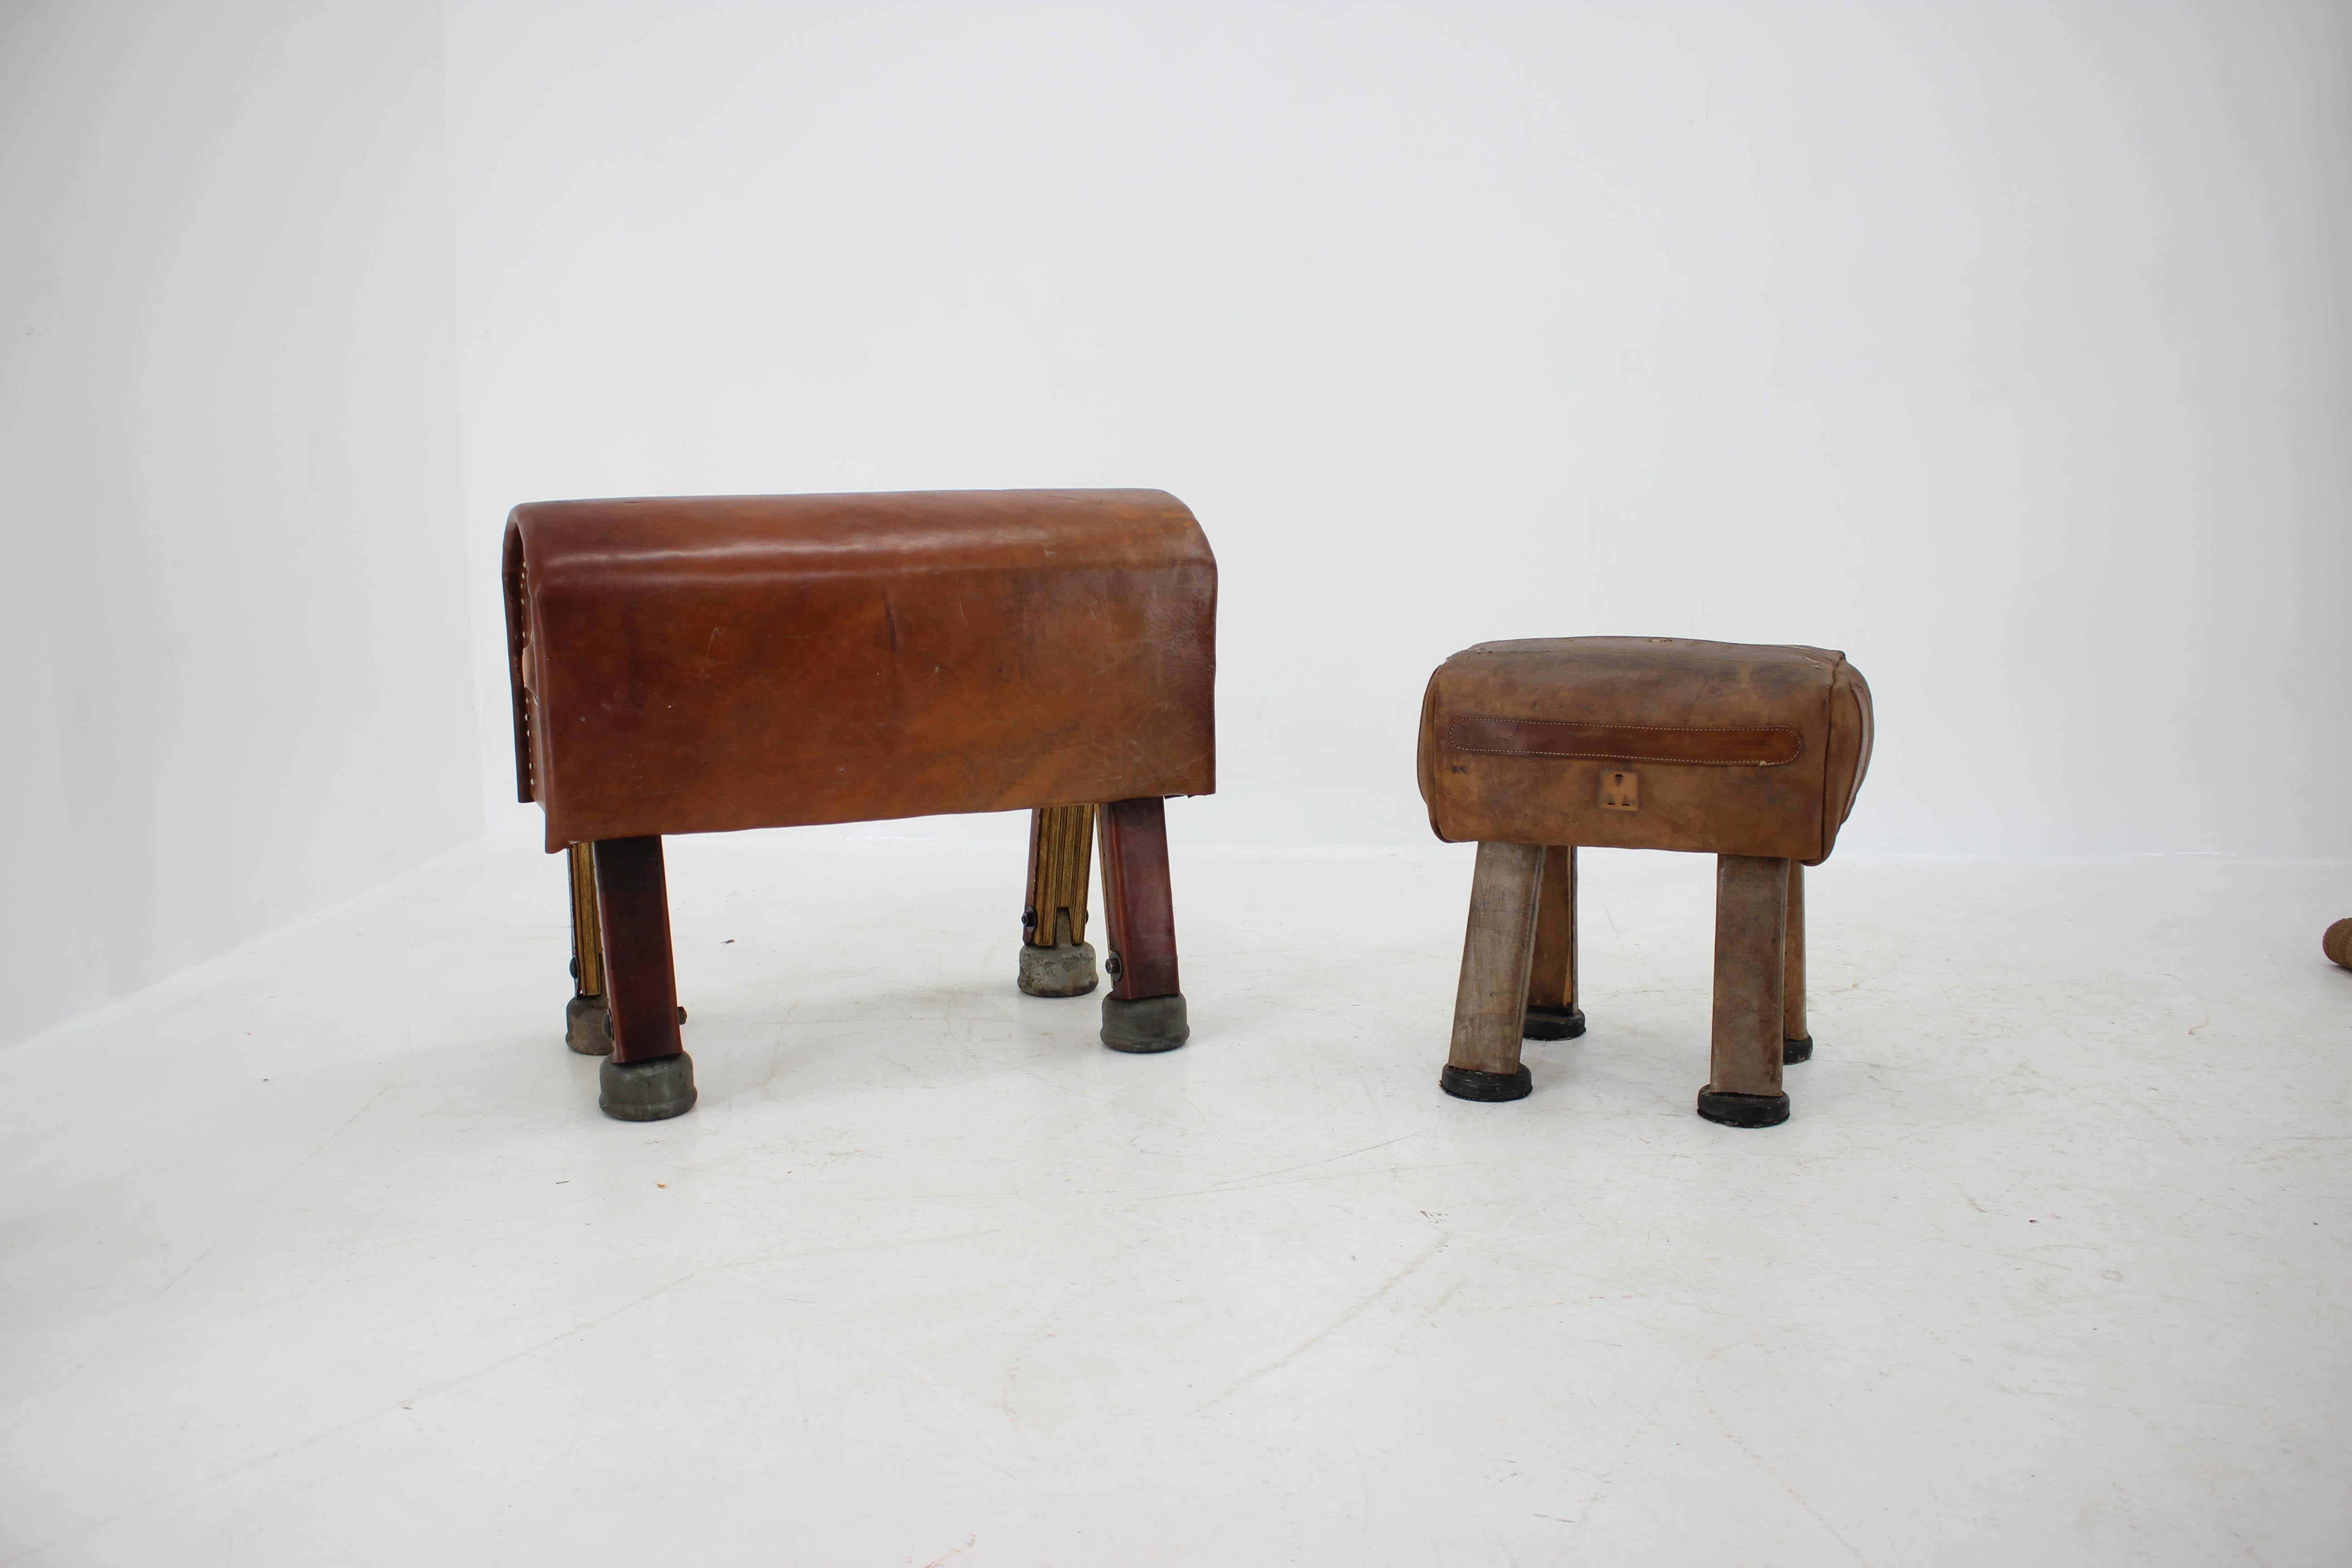 Set of two benches in a sport style from wood, steel and leather.
Sizes:
Big bench - Height 62 cm
Width 73 cm
Depth 30 cm
Small bench - Height 45 cm
Width 46 cm
Depth 32 cm.